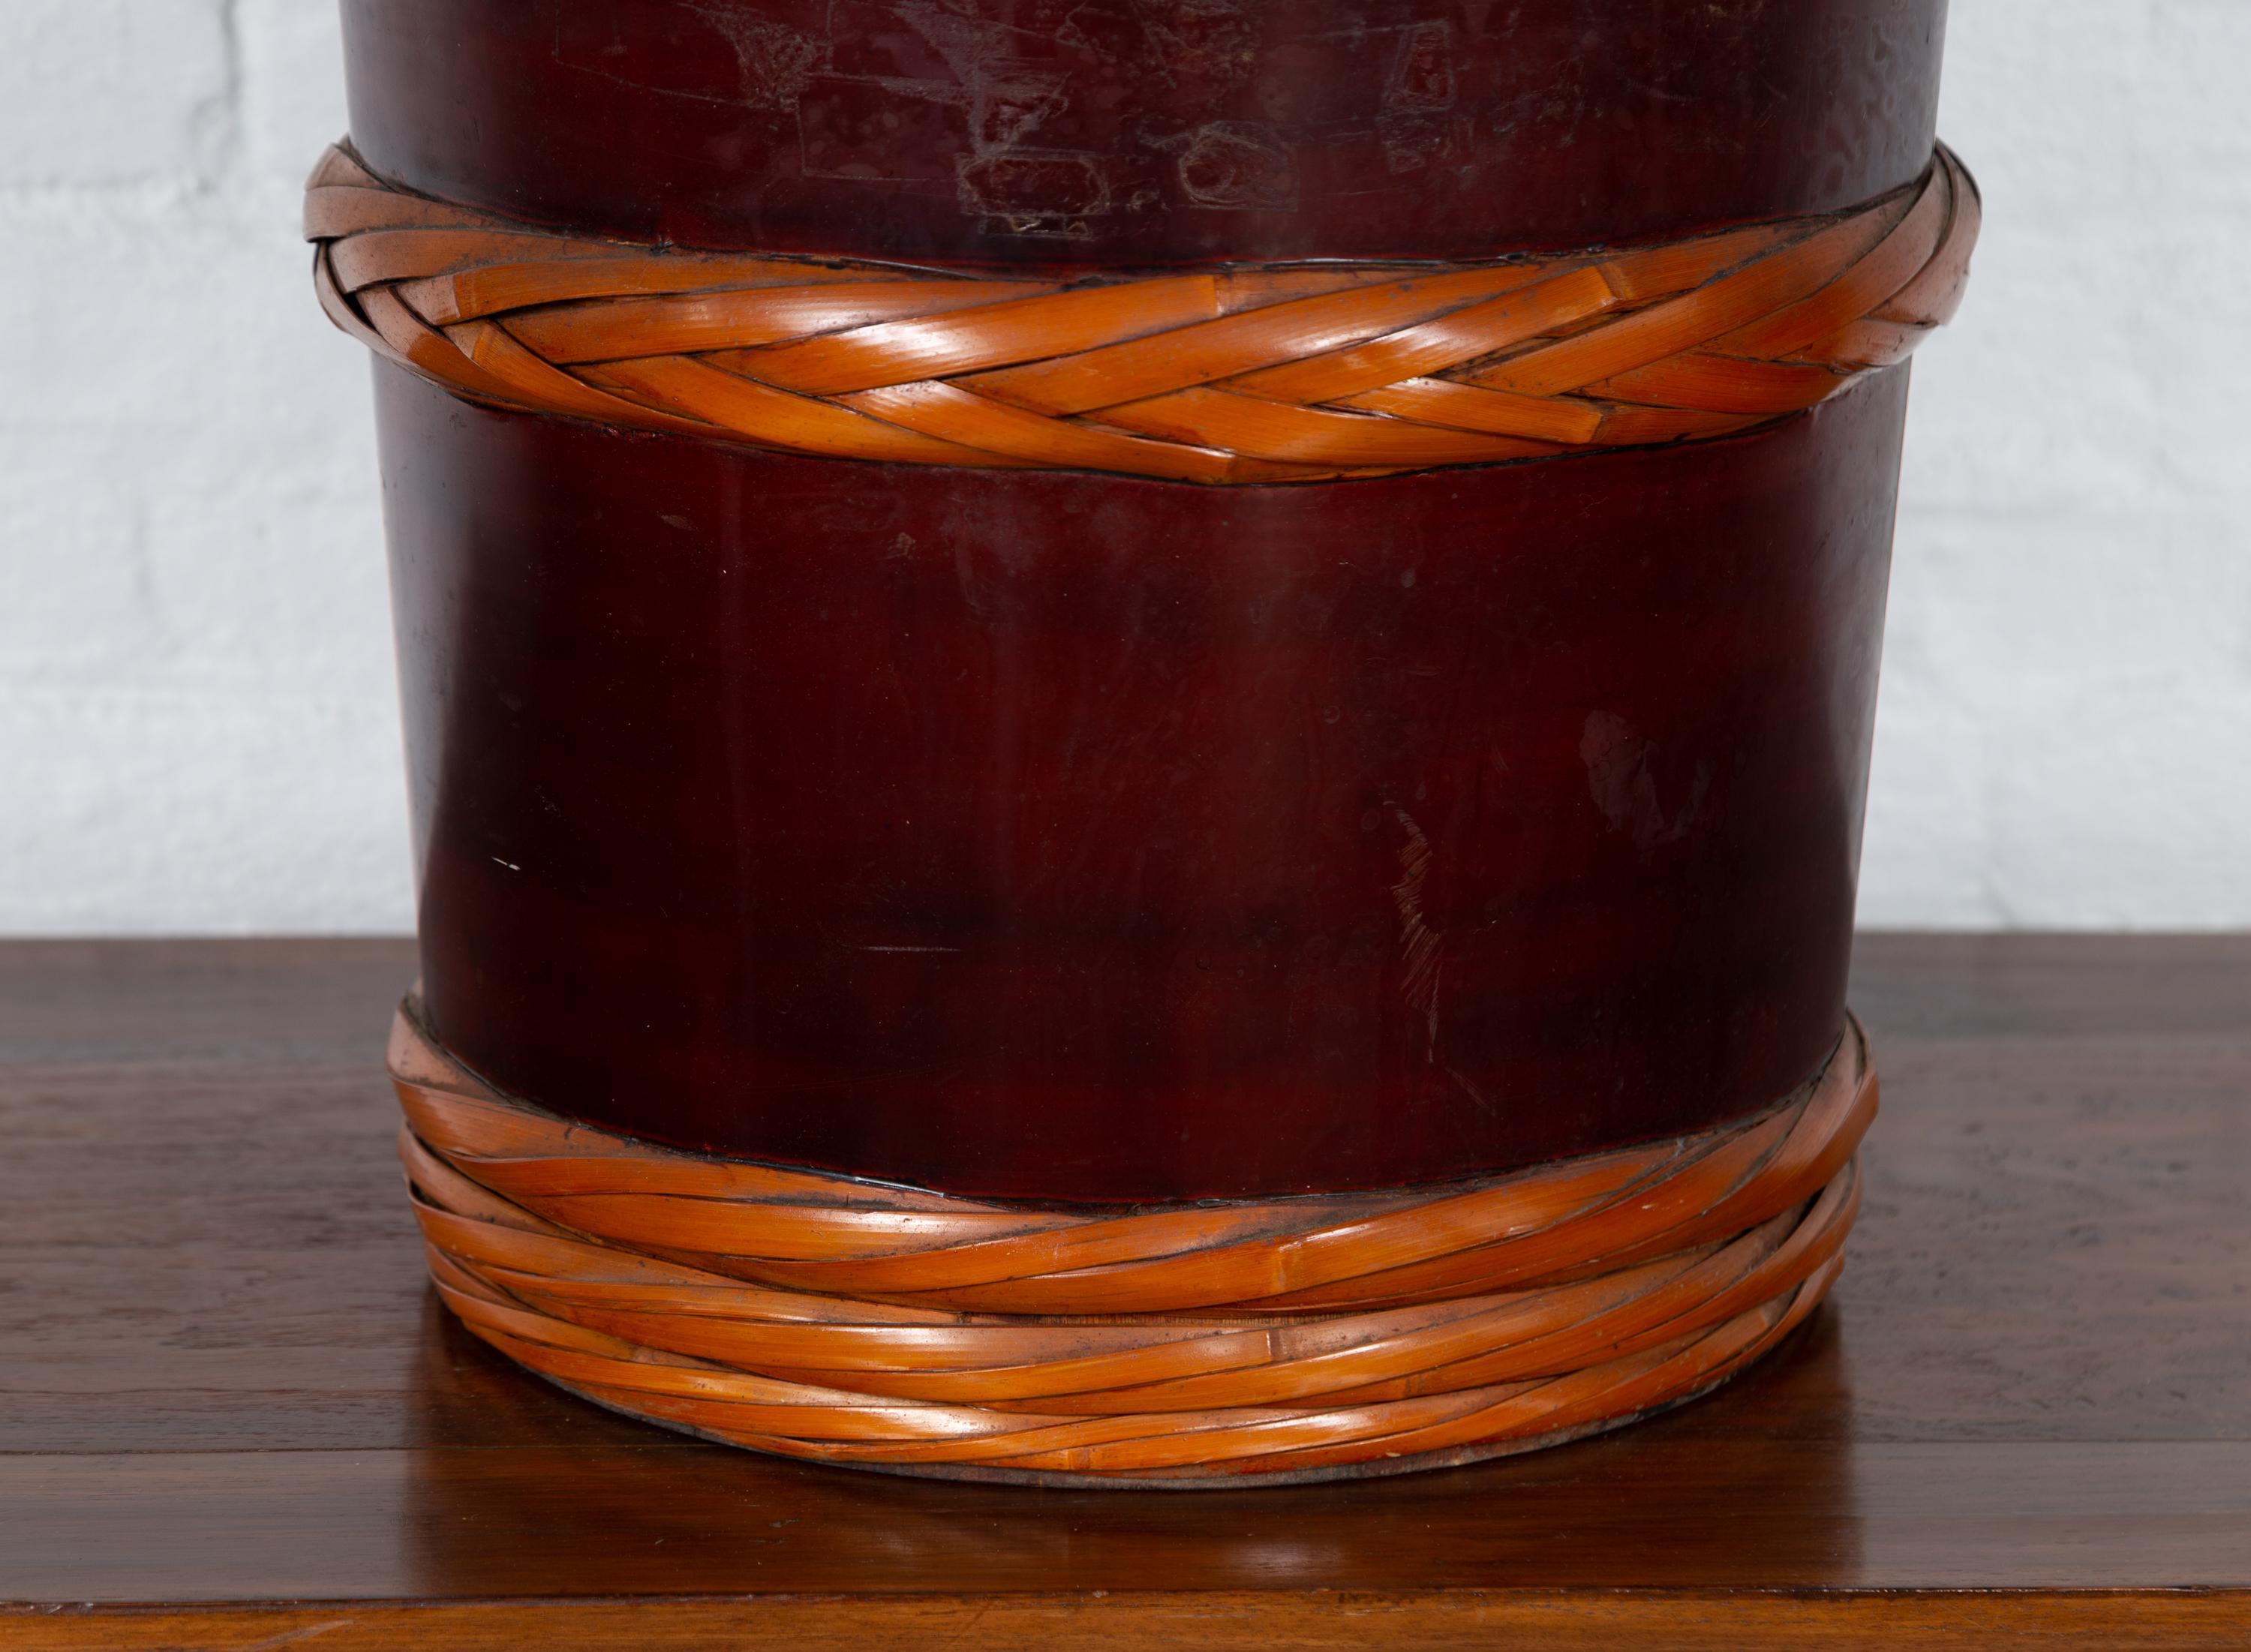 20th Century Vintage Chinese Wooden Barrel Planter with Rope Design with Red Undertone